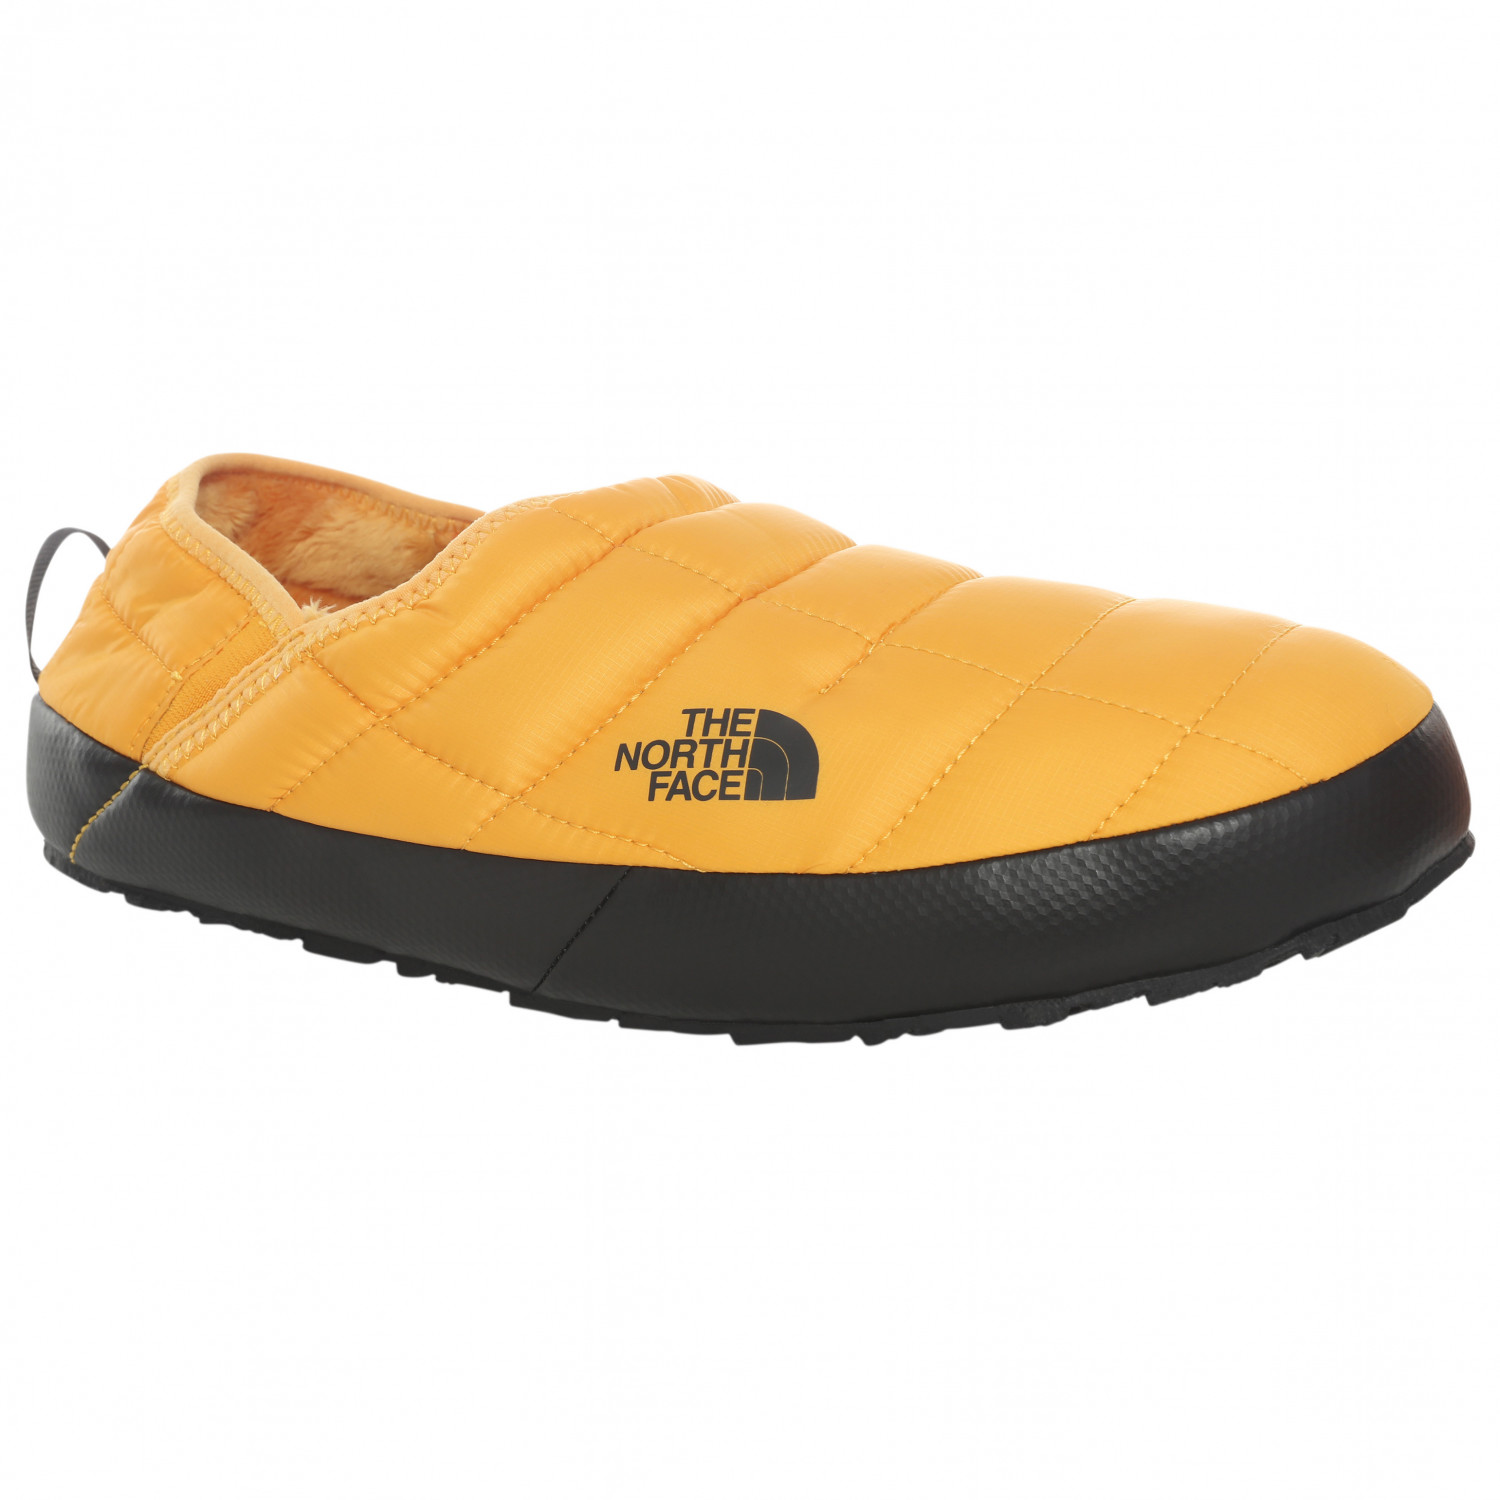 Домашние тапочки The North Face Thermoball Traction Mule V, цвет Summit Gold/TNF Black мужские мюли the north face thermoball eco traction черный